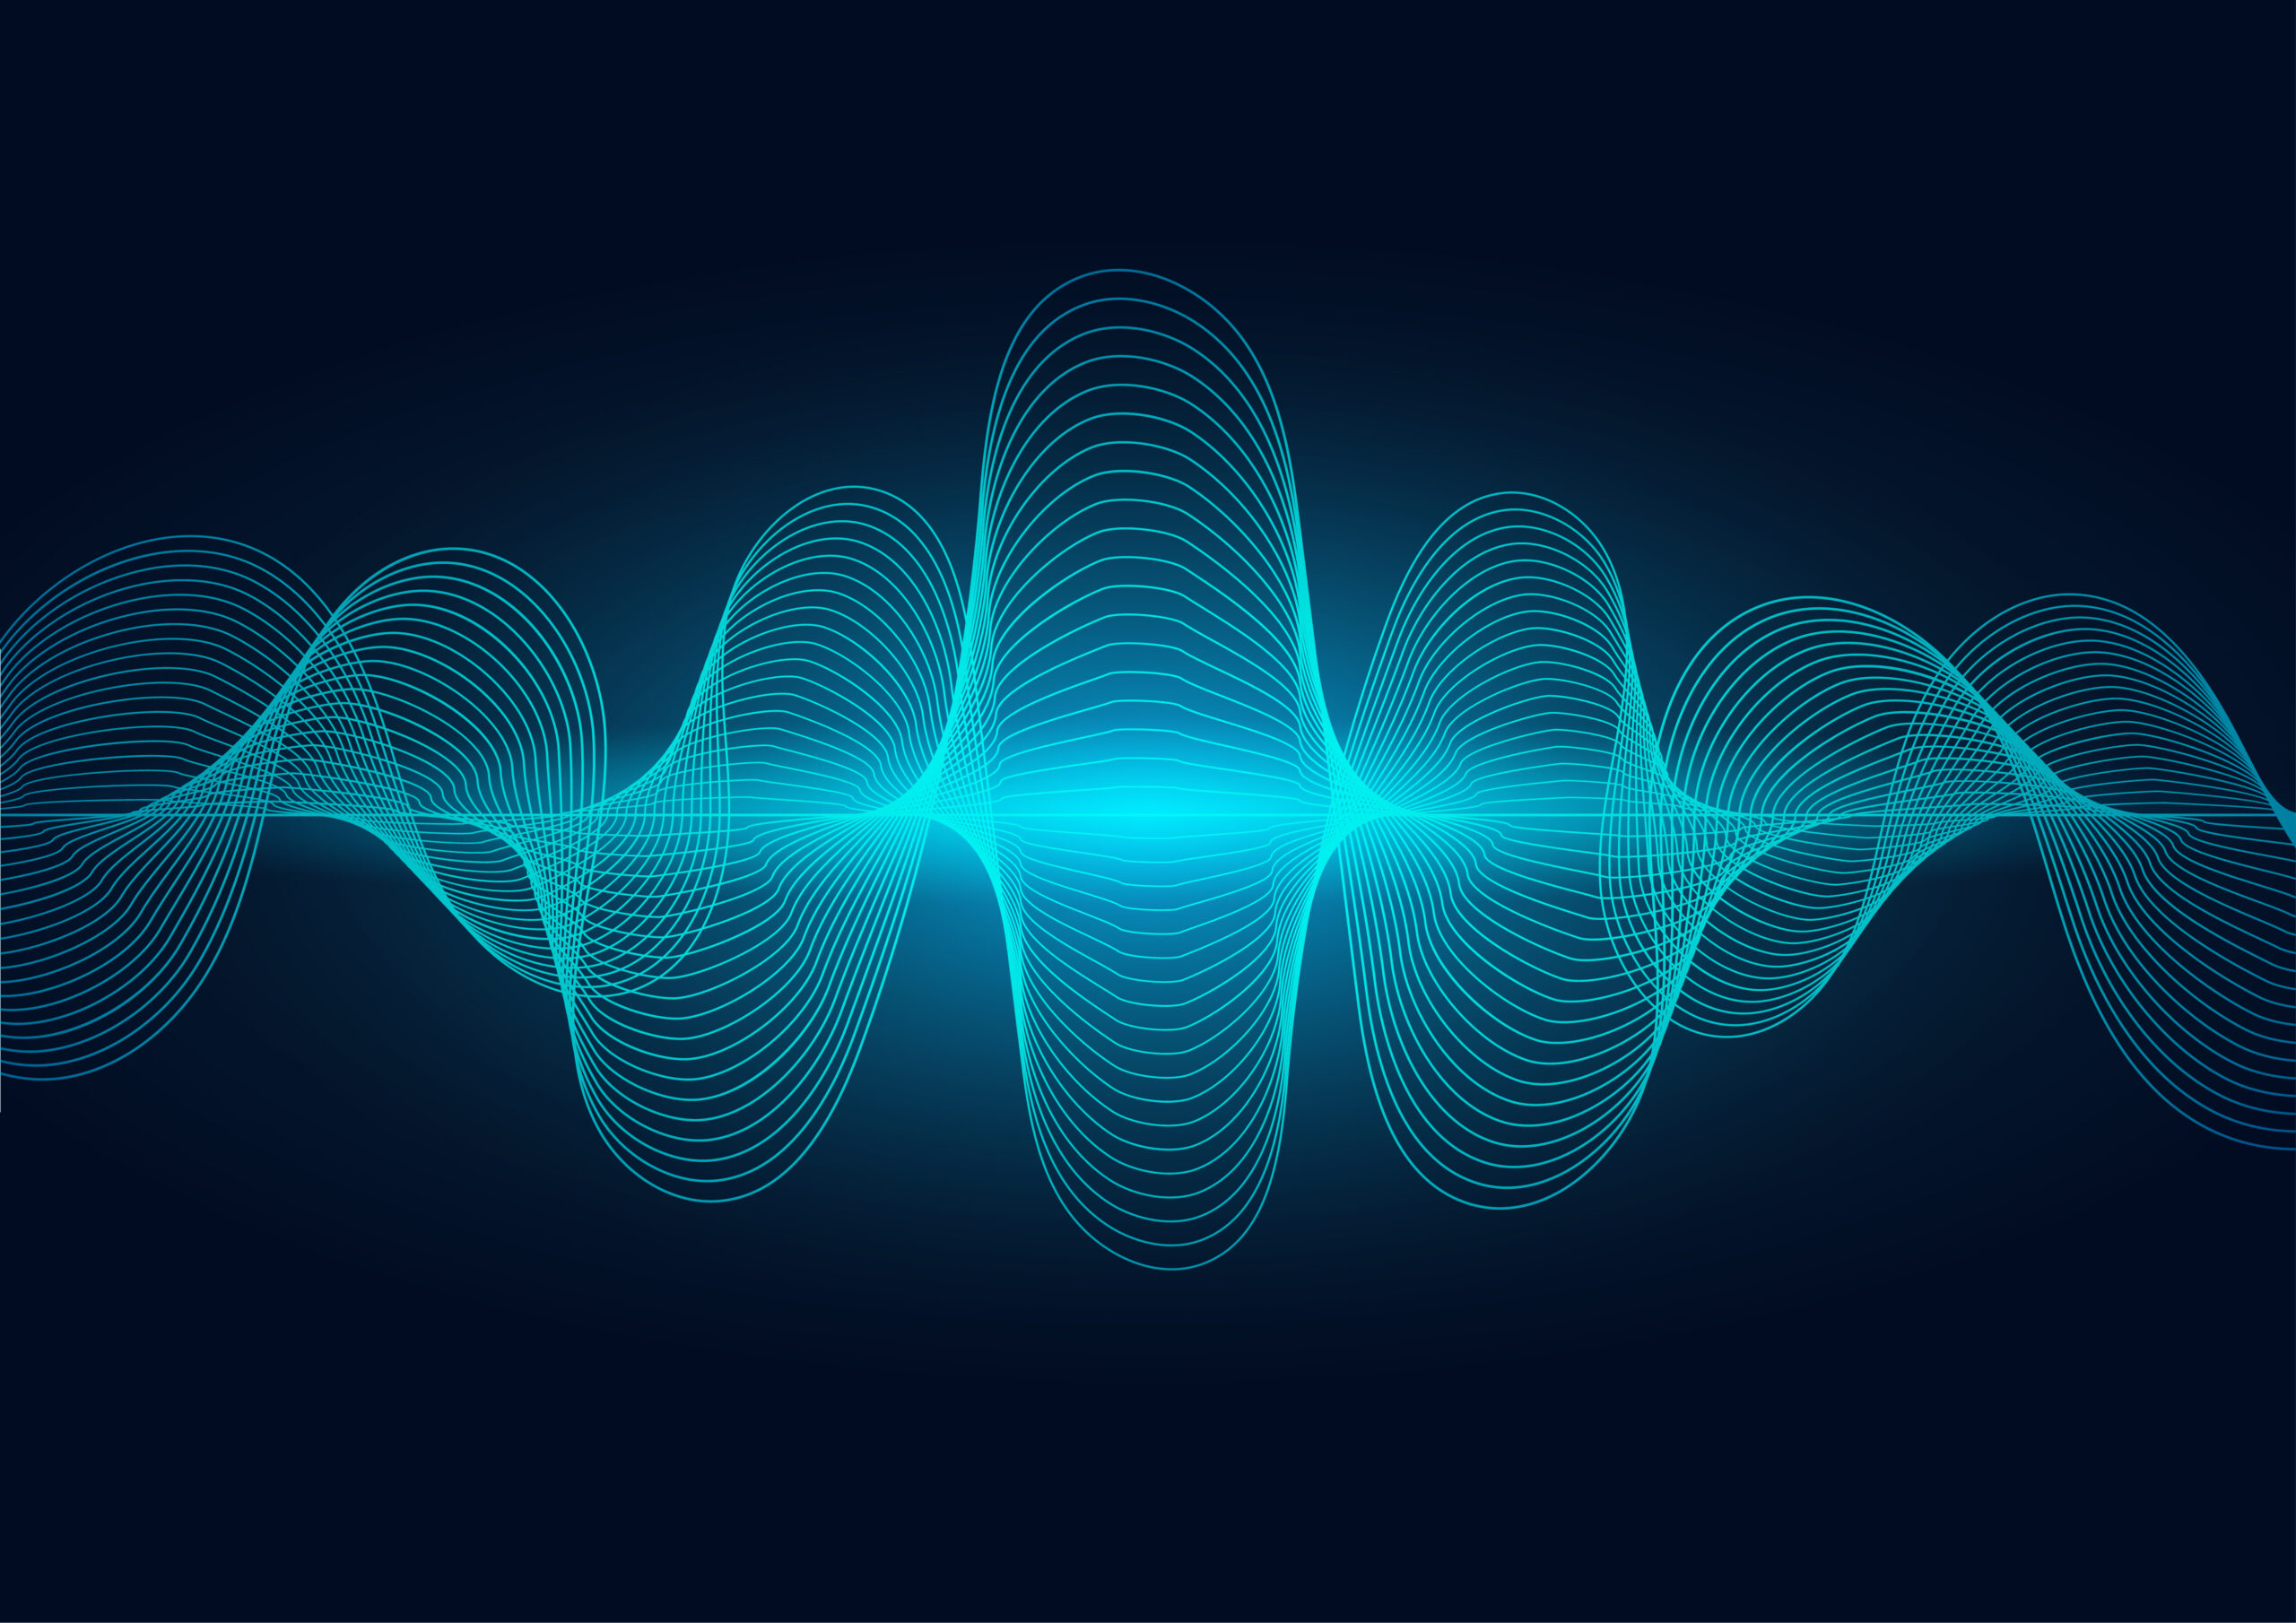 Sound waves can be perceived annoying, especially in silent electric or autonomous vehicles. Active noise cancellation or ANC technology answers to these challenges.